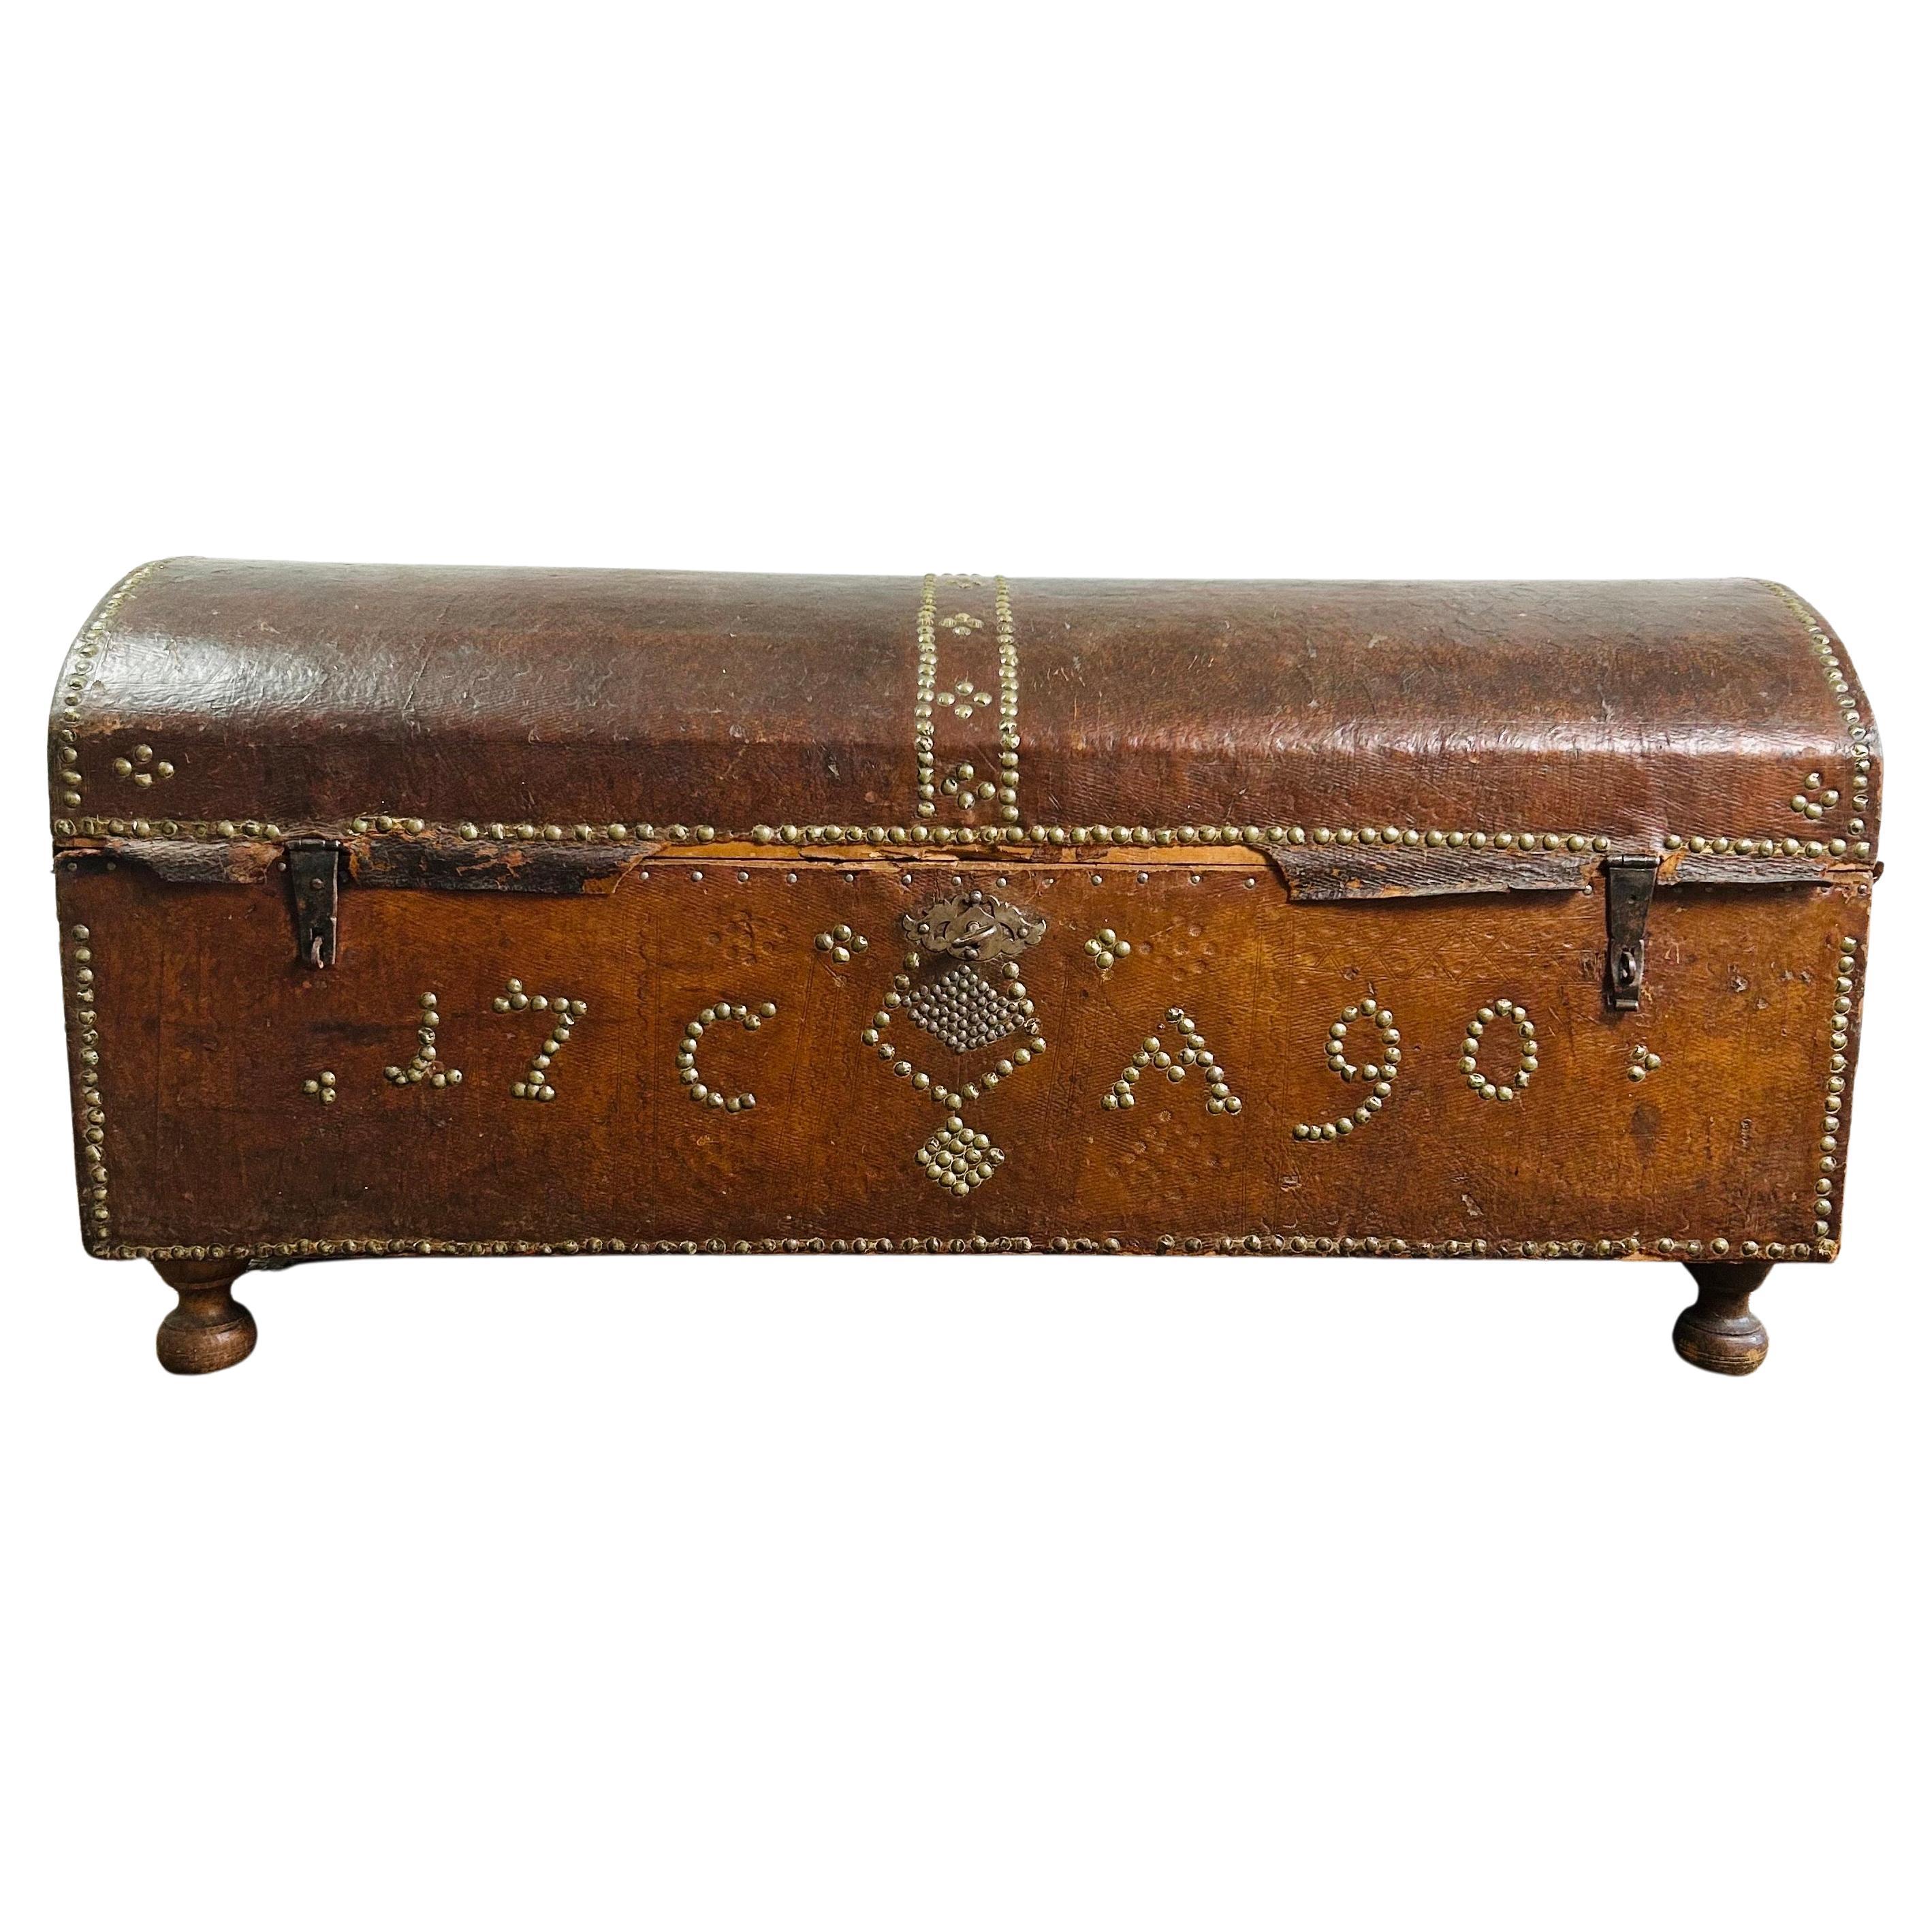 Trunk - Dome Chest Wrapped in Studded Leather - Italy - 18th Louis XV Period